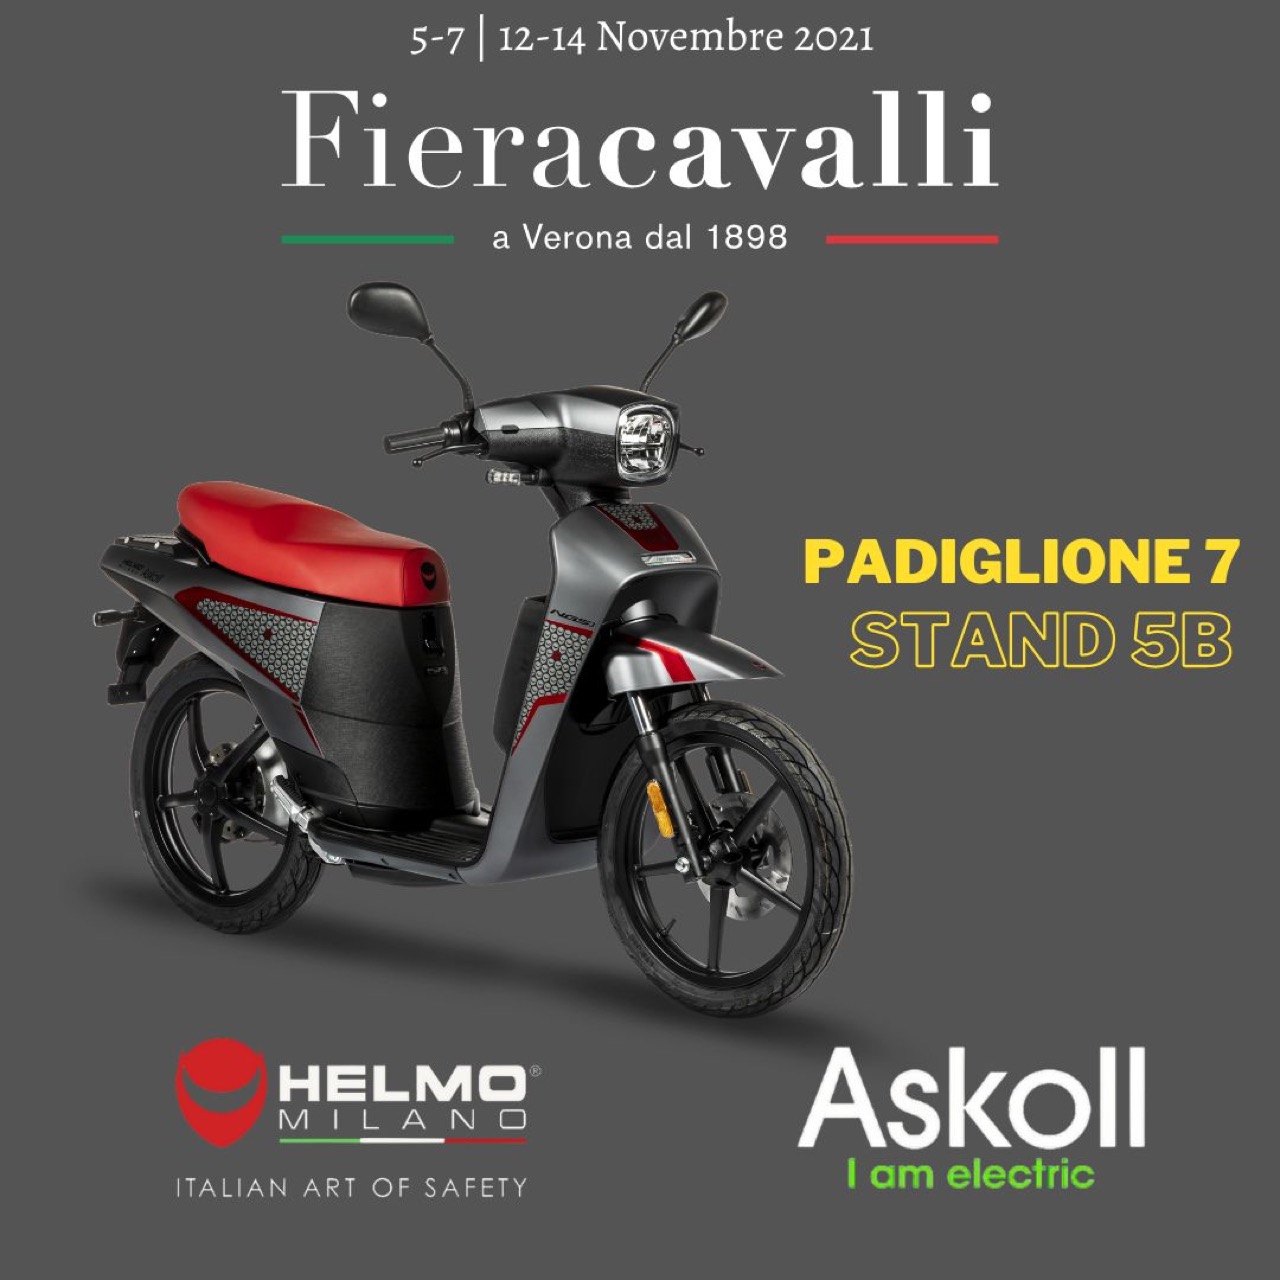 Askoll NGS3 by Helmo Milano in evidenza a Fieracavalli 2021